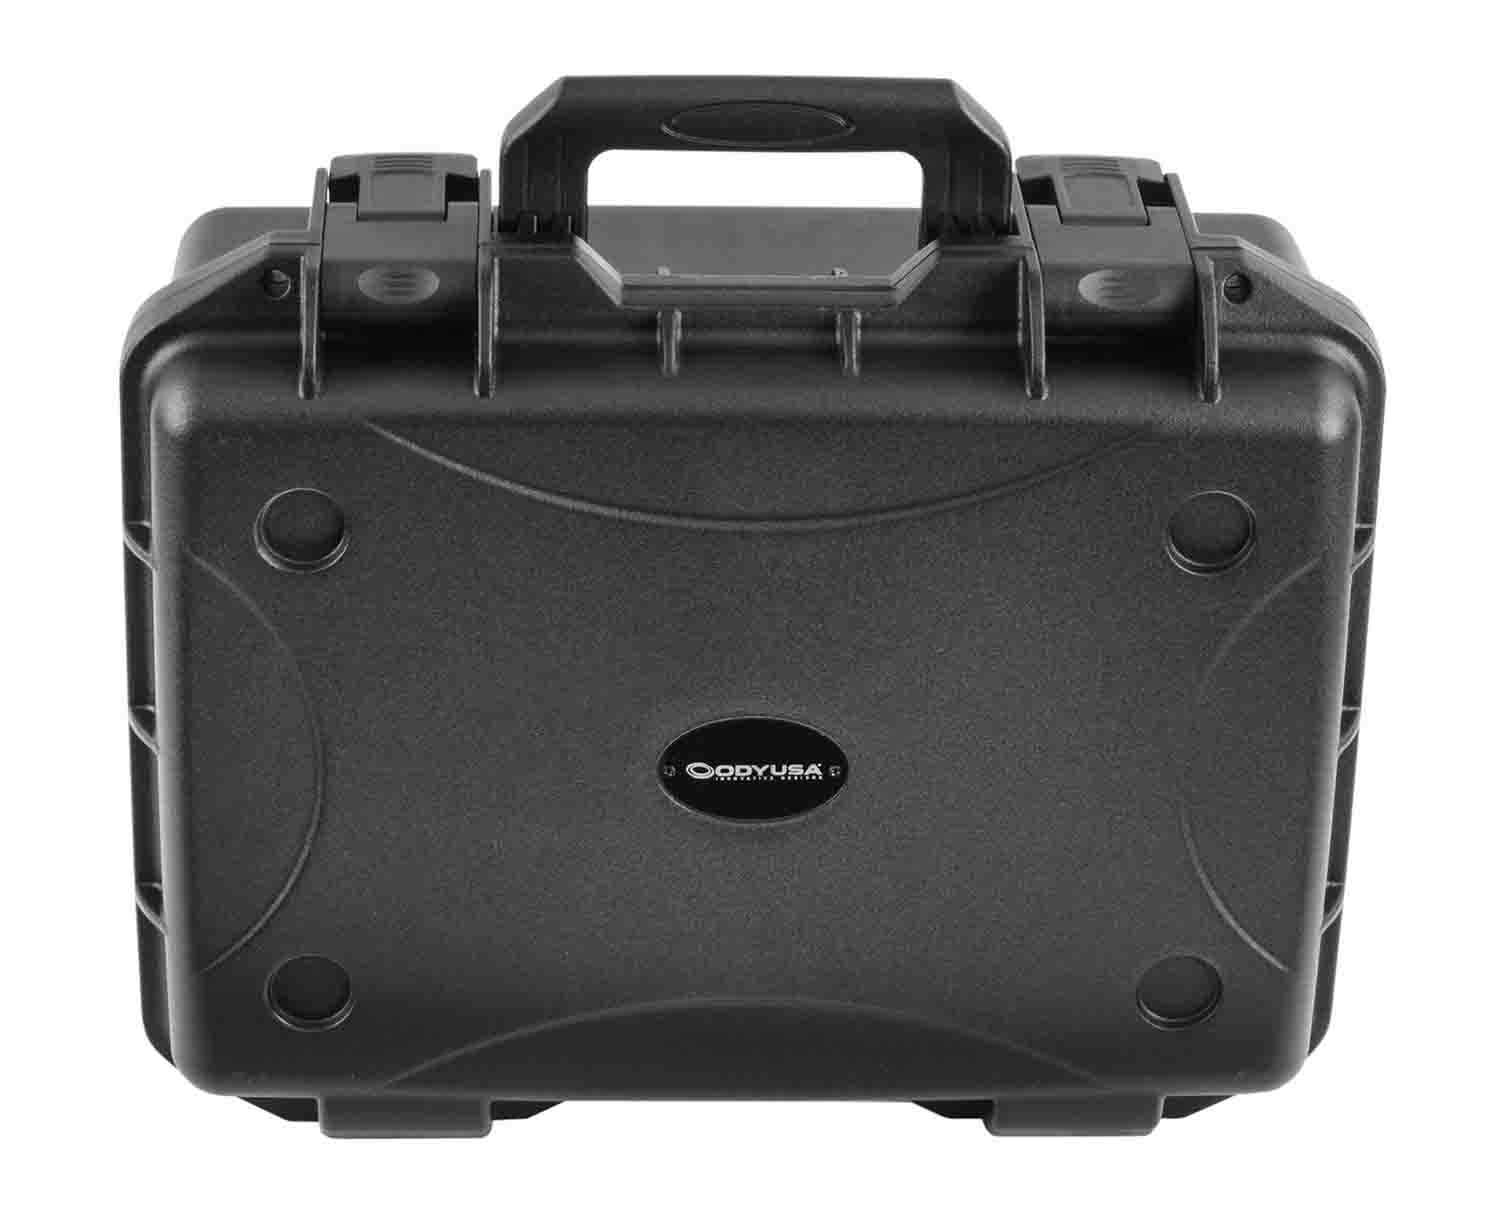 Odyssey VU151006 Vulcan Injection-Molded Utility Case with Pluck Foam - 15.25 x 10.5 x 4" Interior - Hollywood DJ